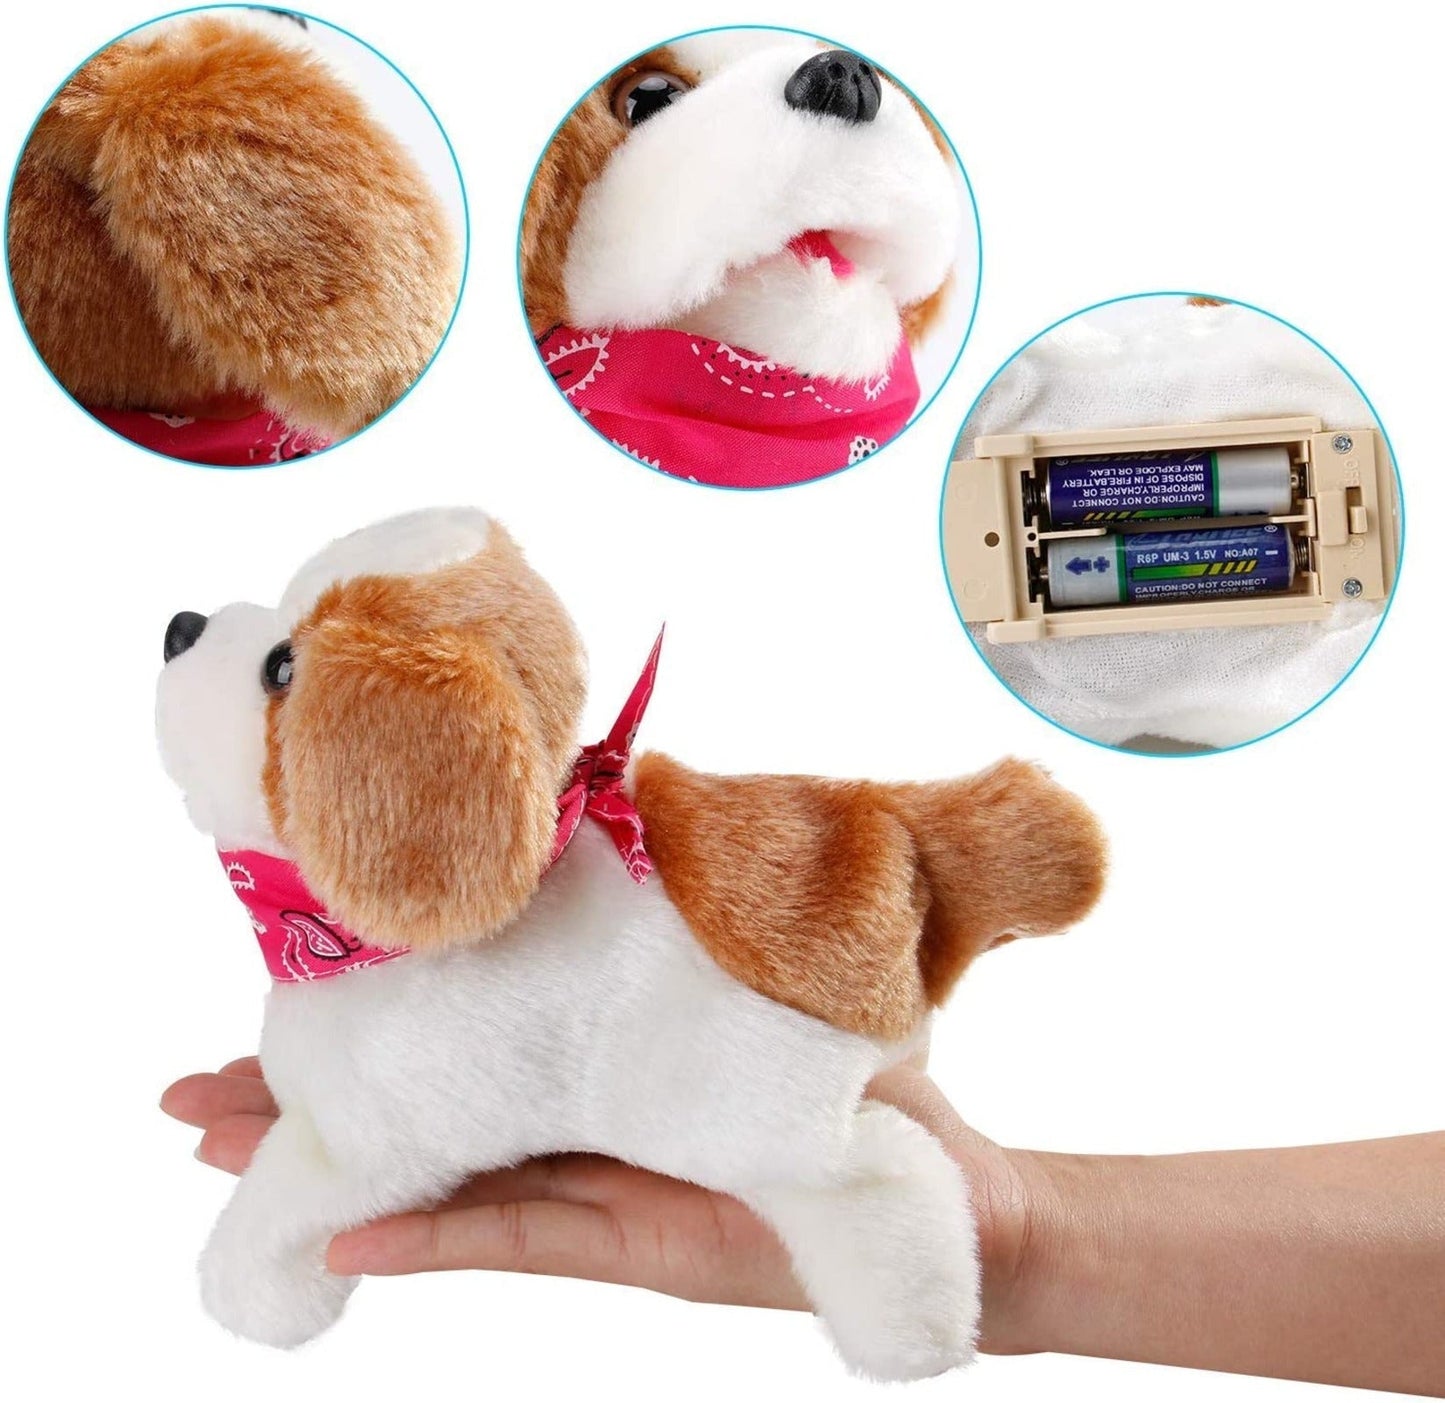 The Adorable Flipping Puppy Toy